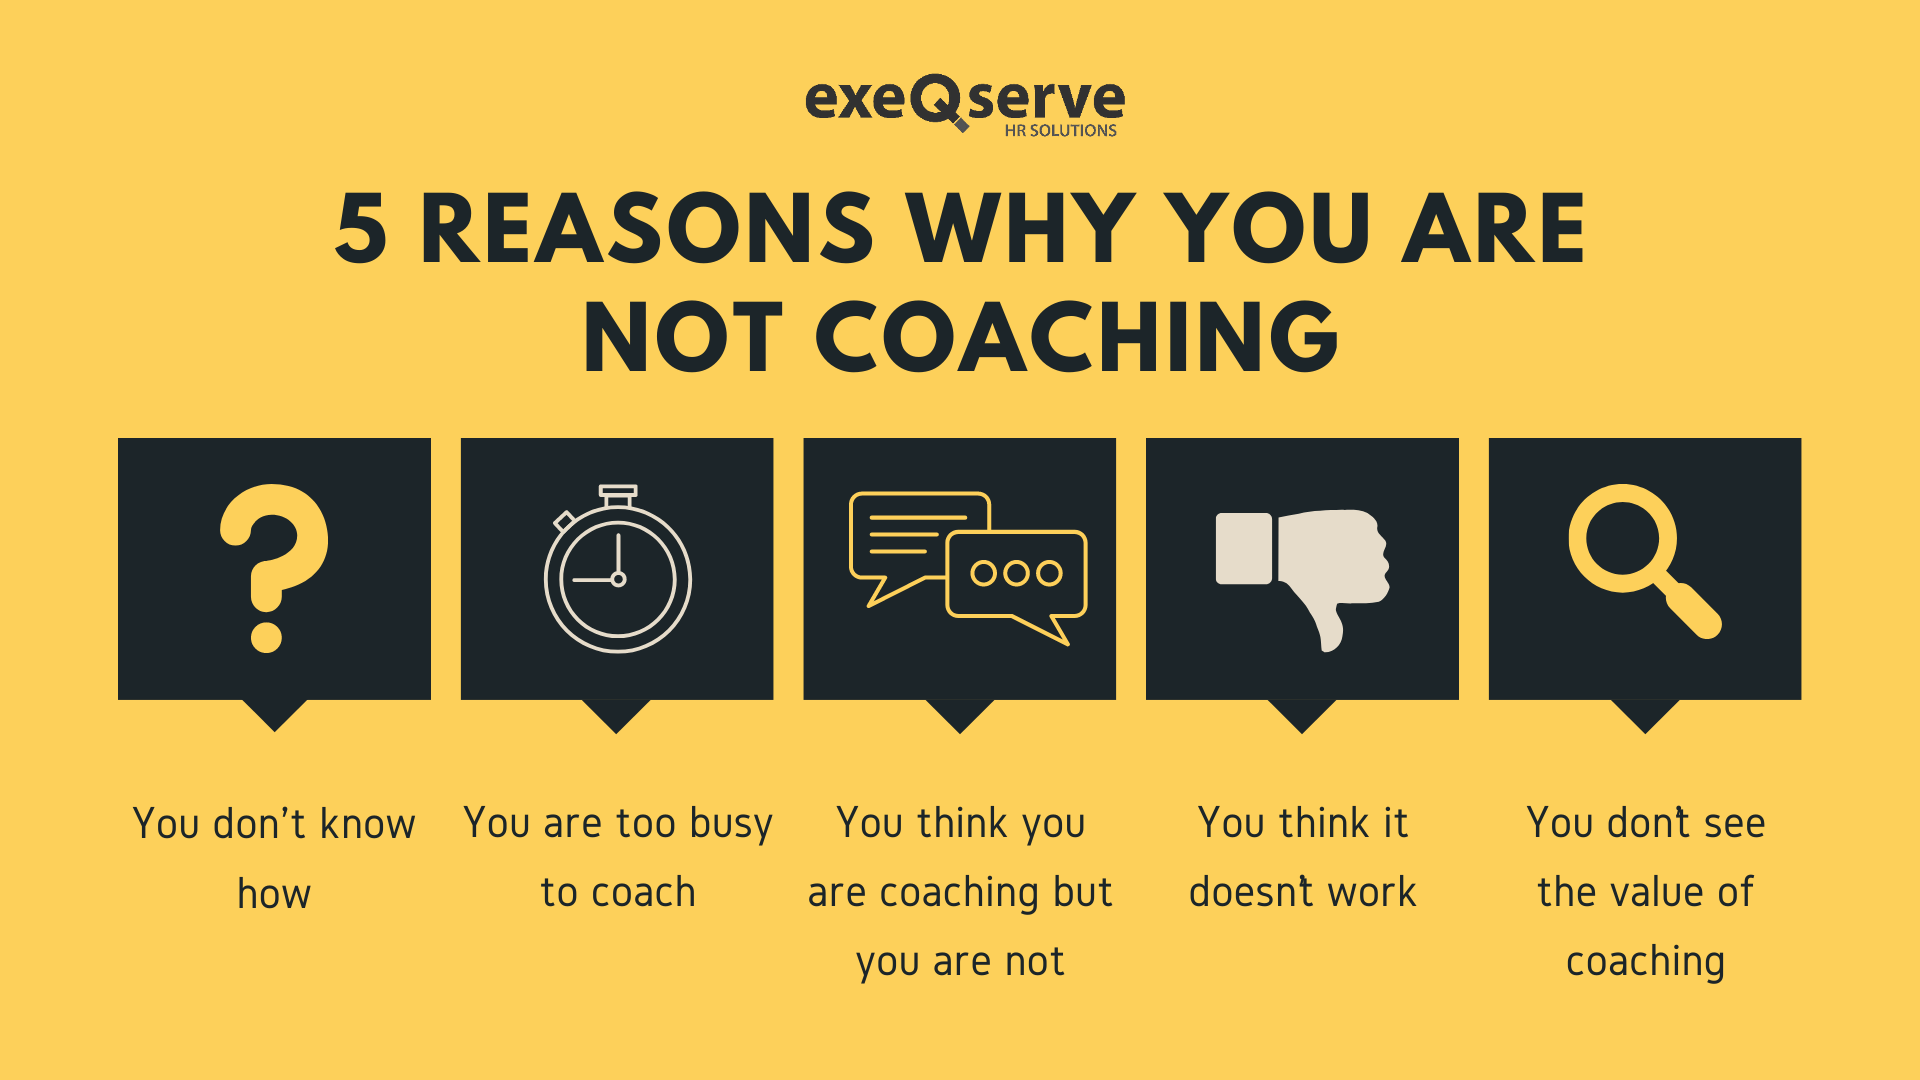 5 Reasons Why You Are Not Coaching